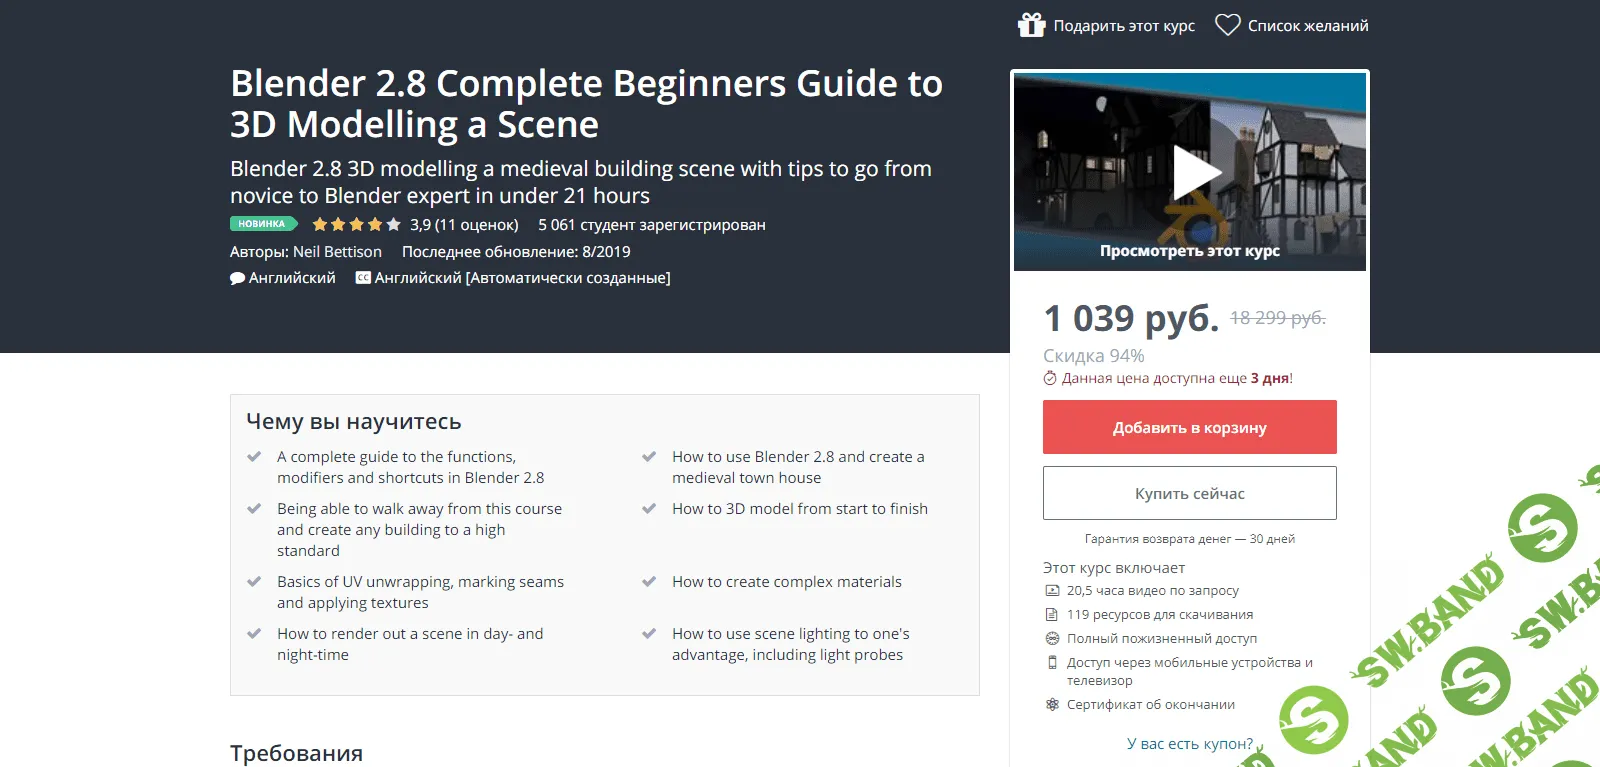 [Udemy] Blender 2.8 Complete Beginners Guide to 3D Modelling a Scene by Neil Bettison